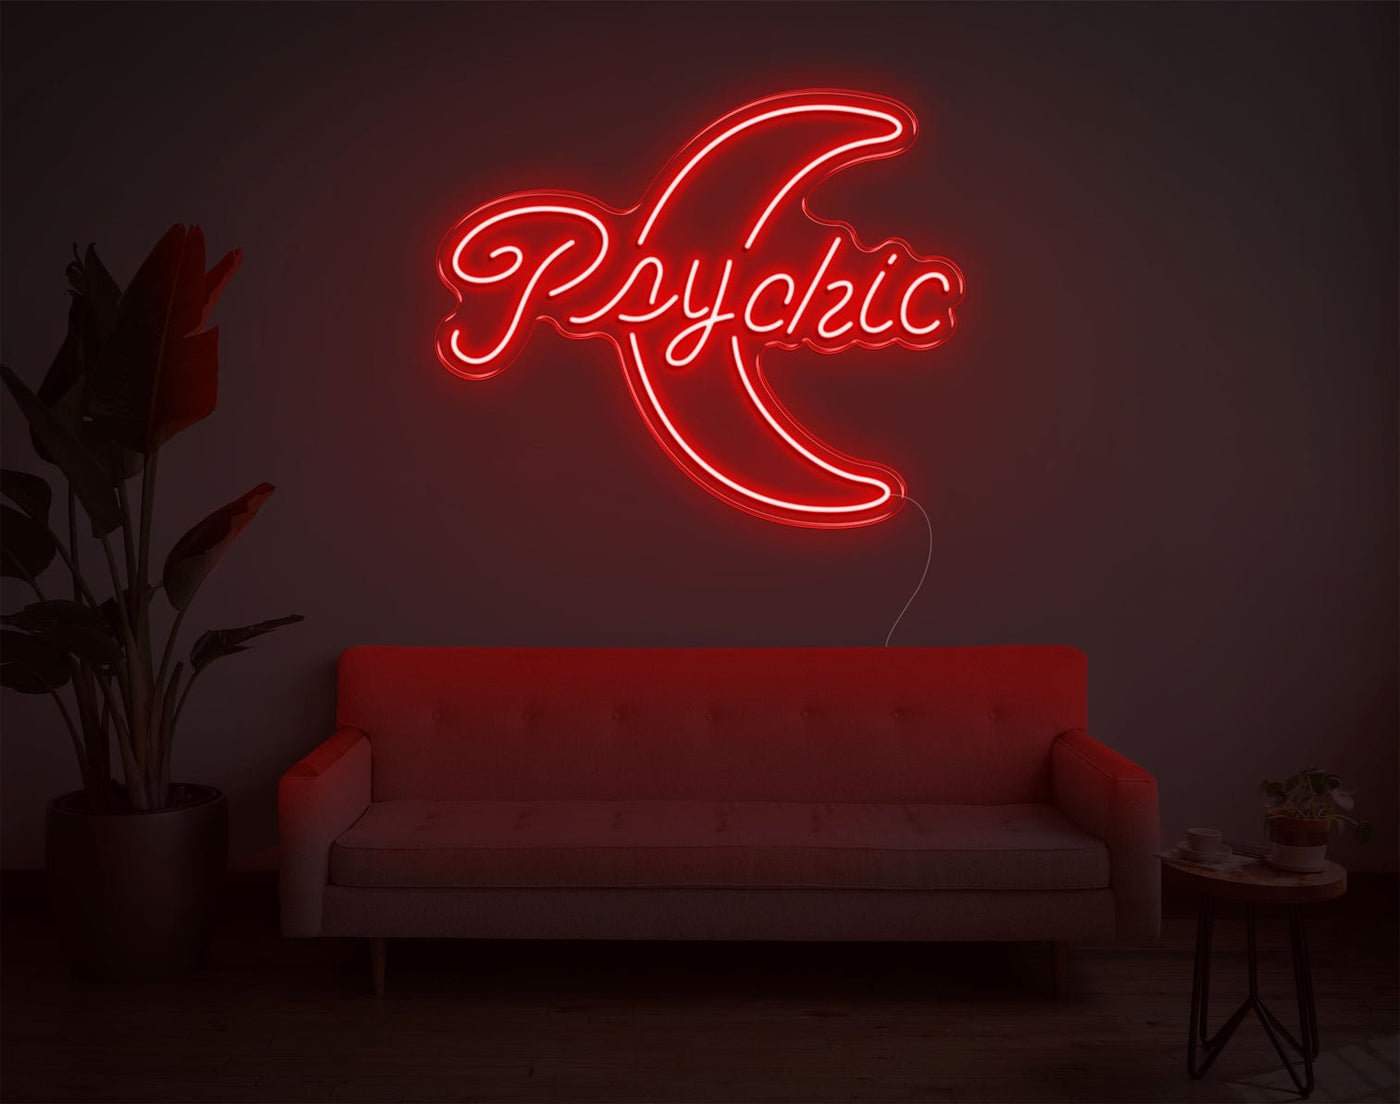 Psychic Moon LED Neon Sign - 23inch x 28inchRed